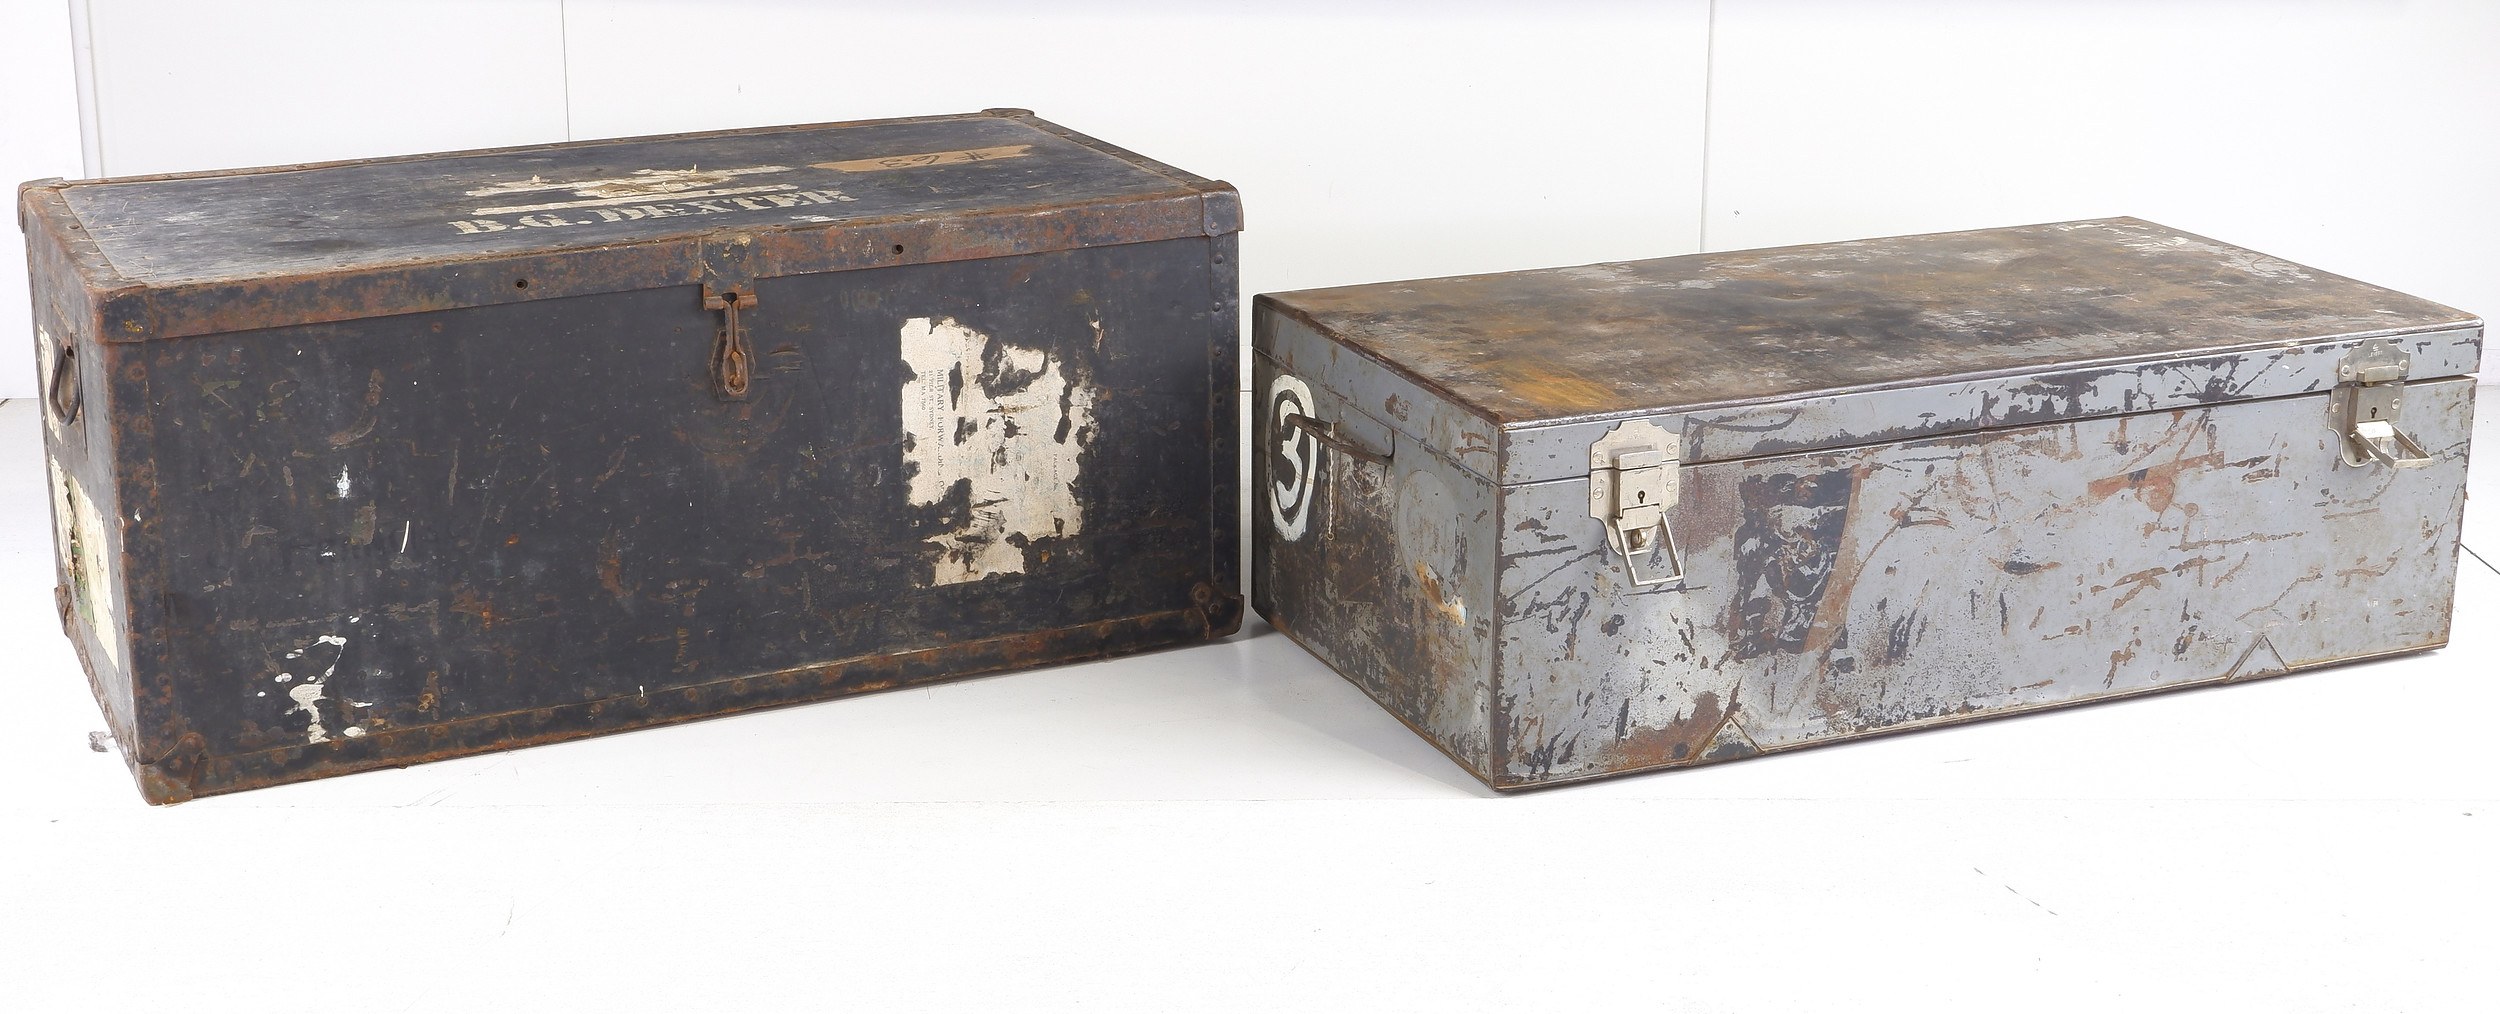 'Two Large Ex Diplomatic Metal Trunks'